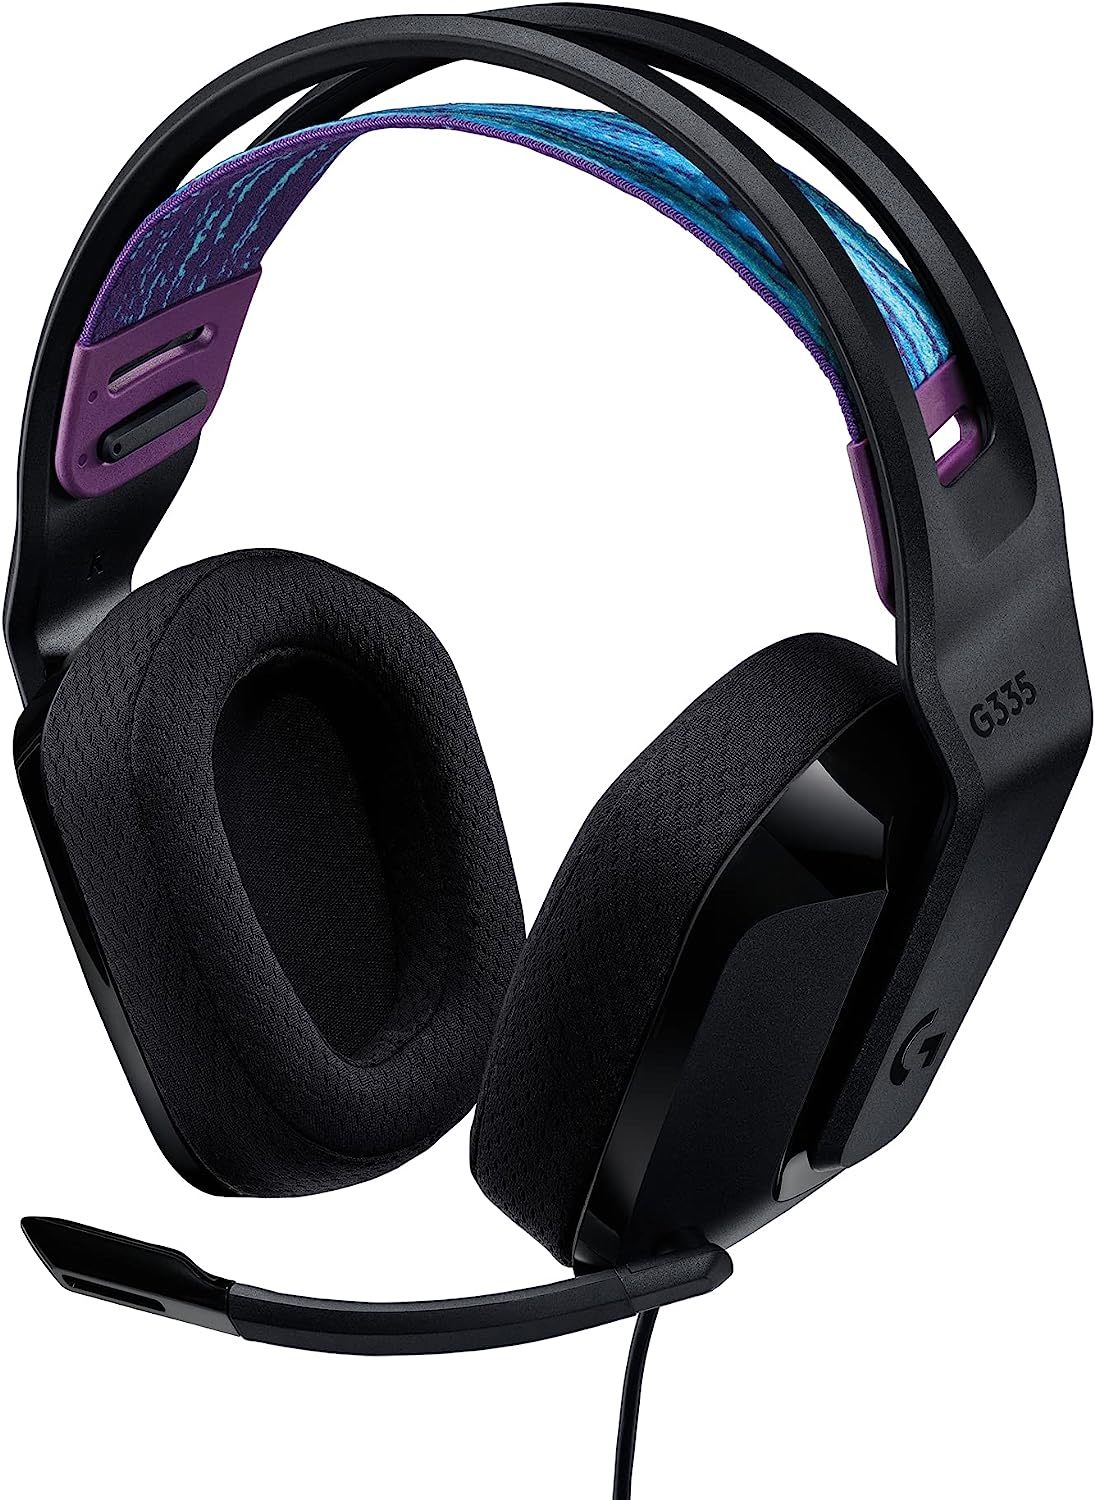 The Black Logitech G335 Wired Gaming Headset Features A Flip-To-Mute Microphone, - $62.98